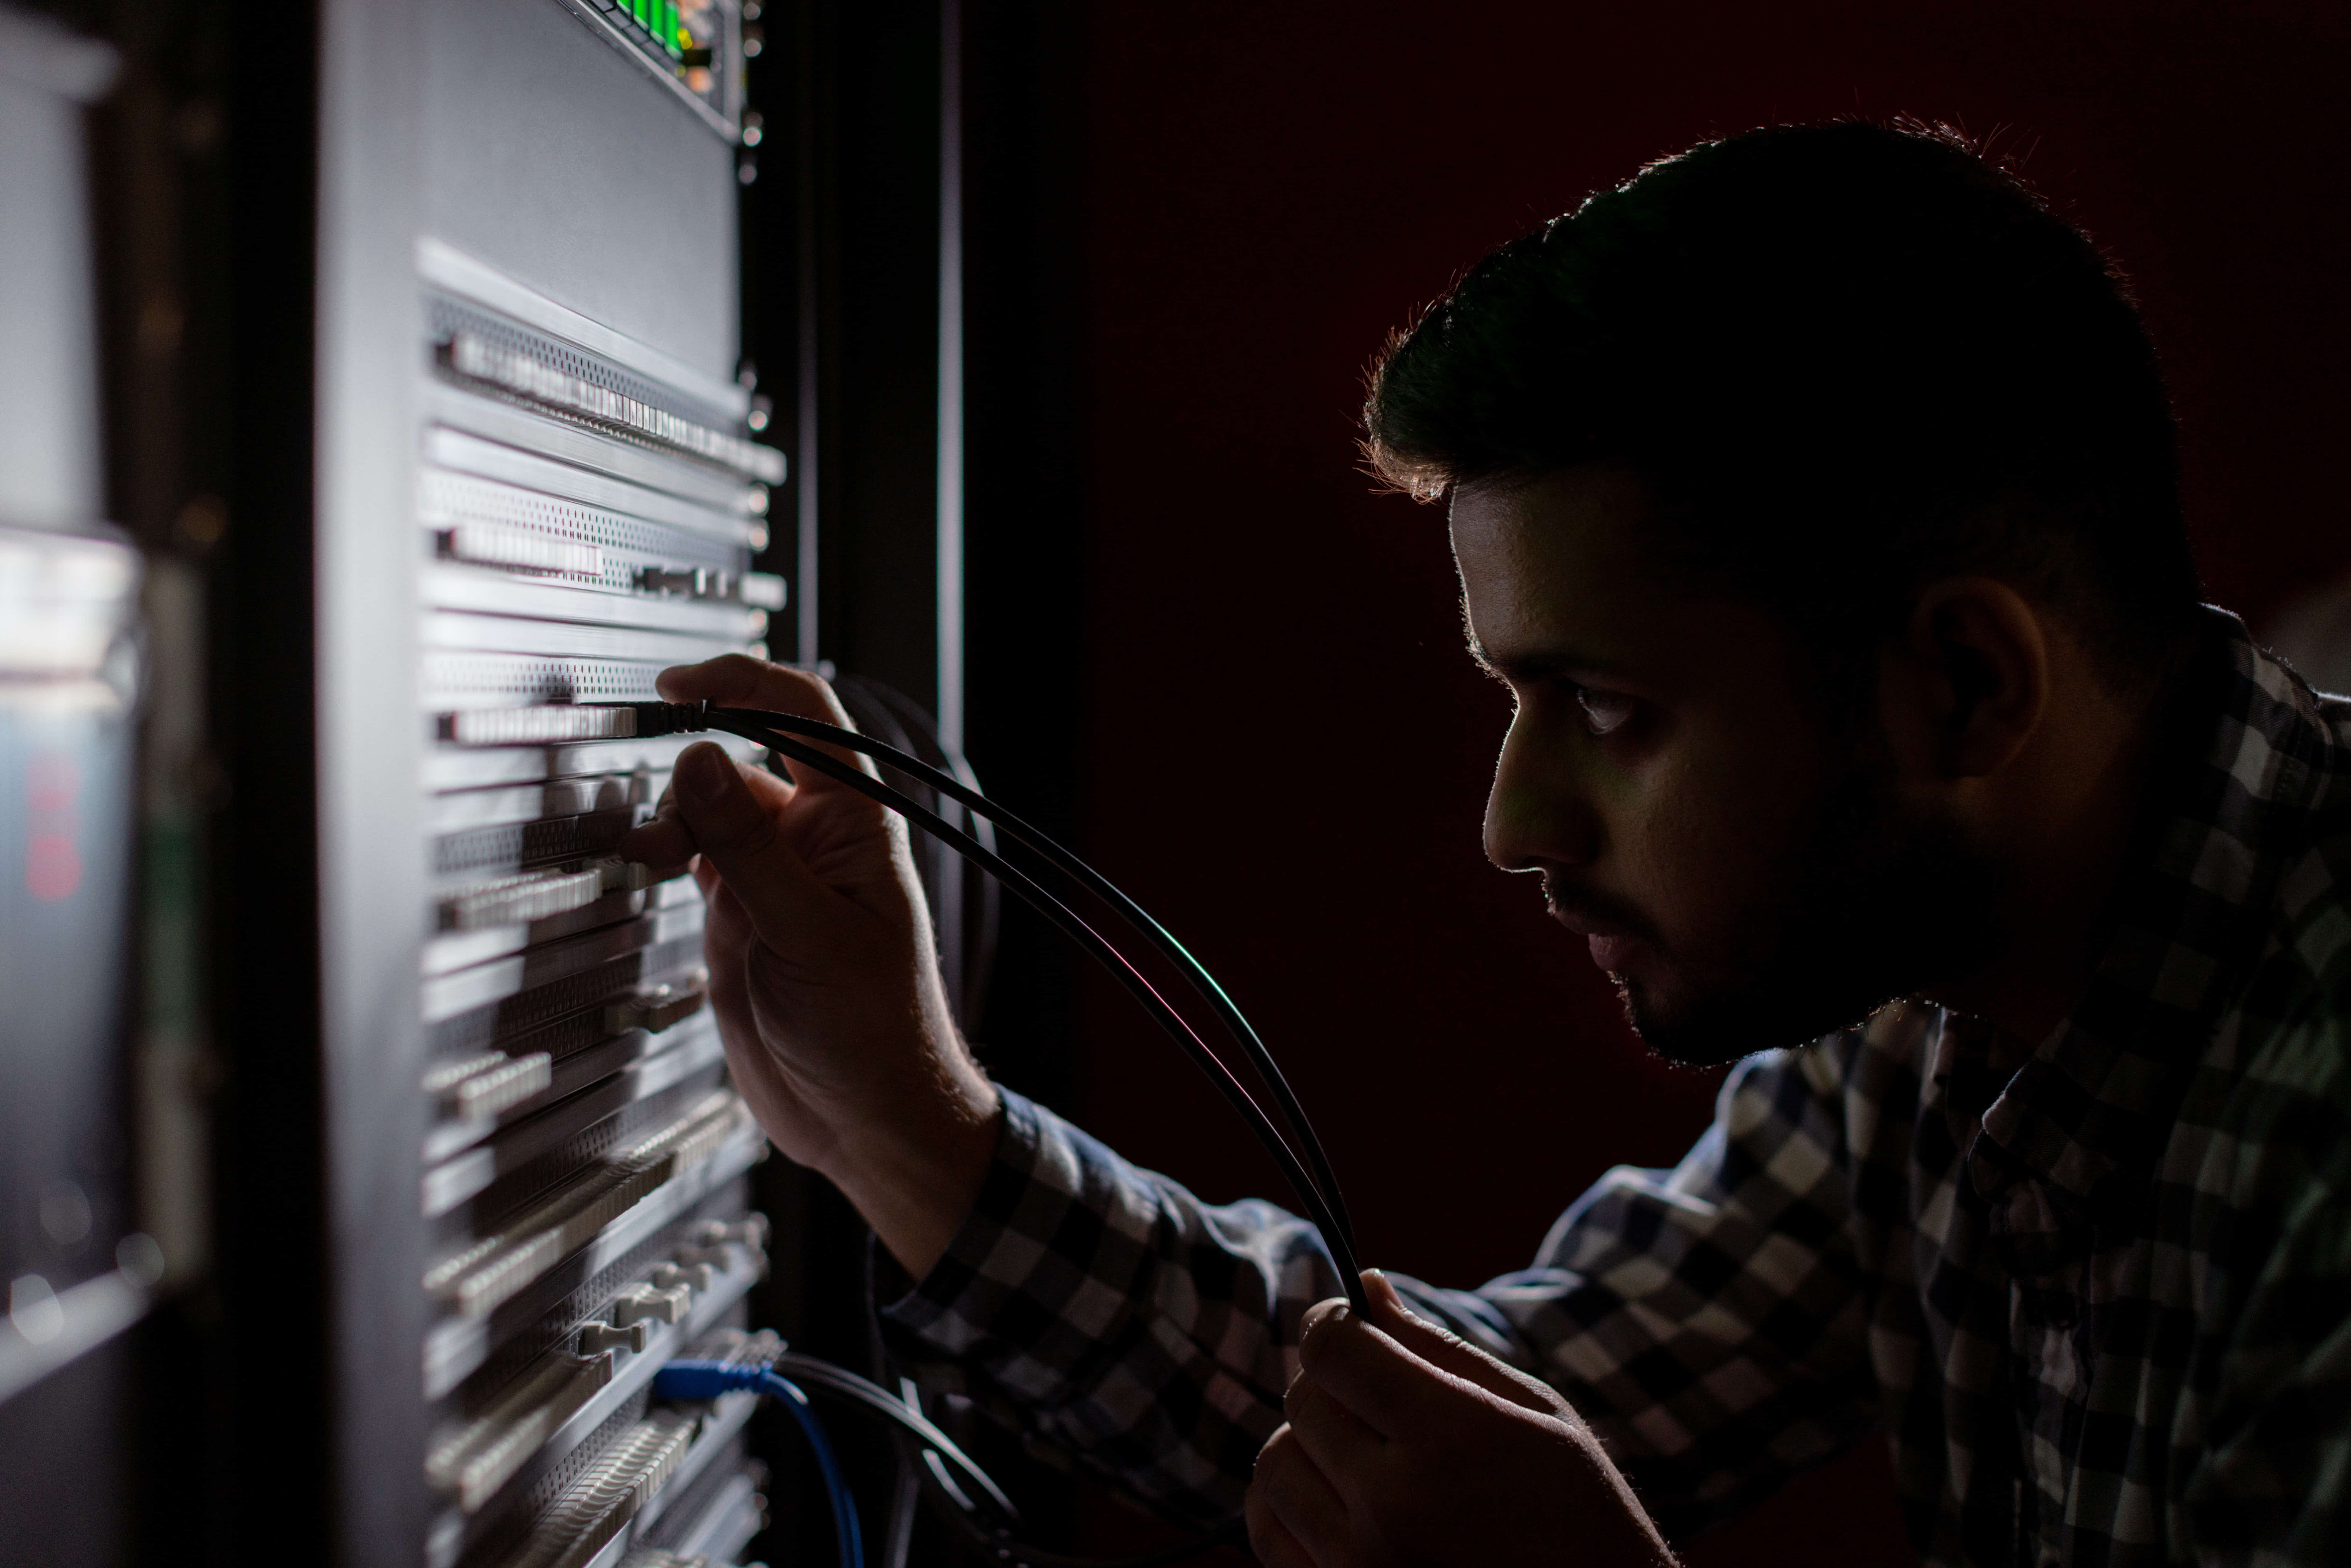 An engineer plugging a cable in a dark room